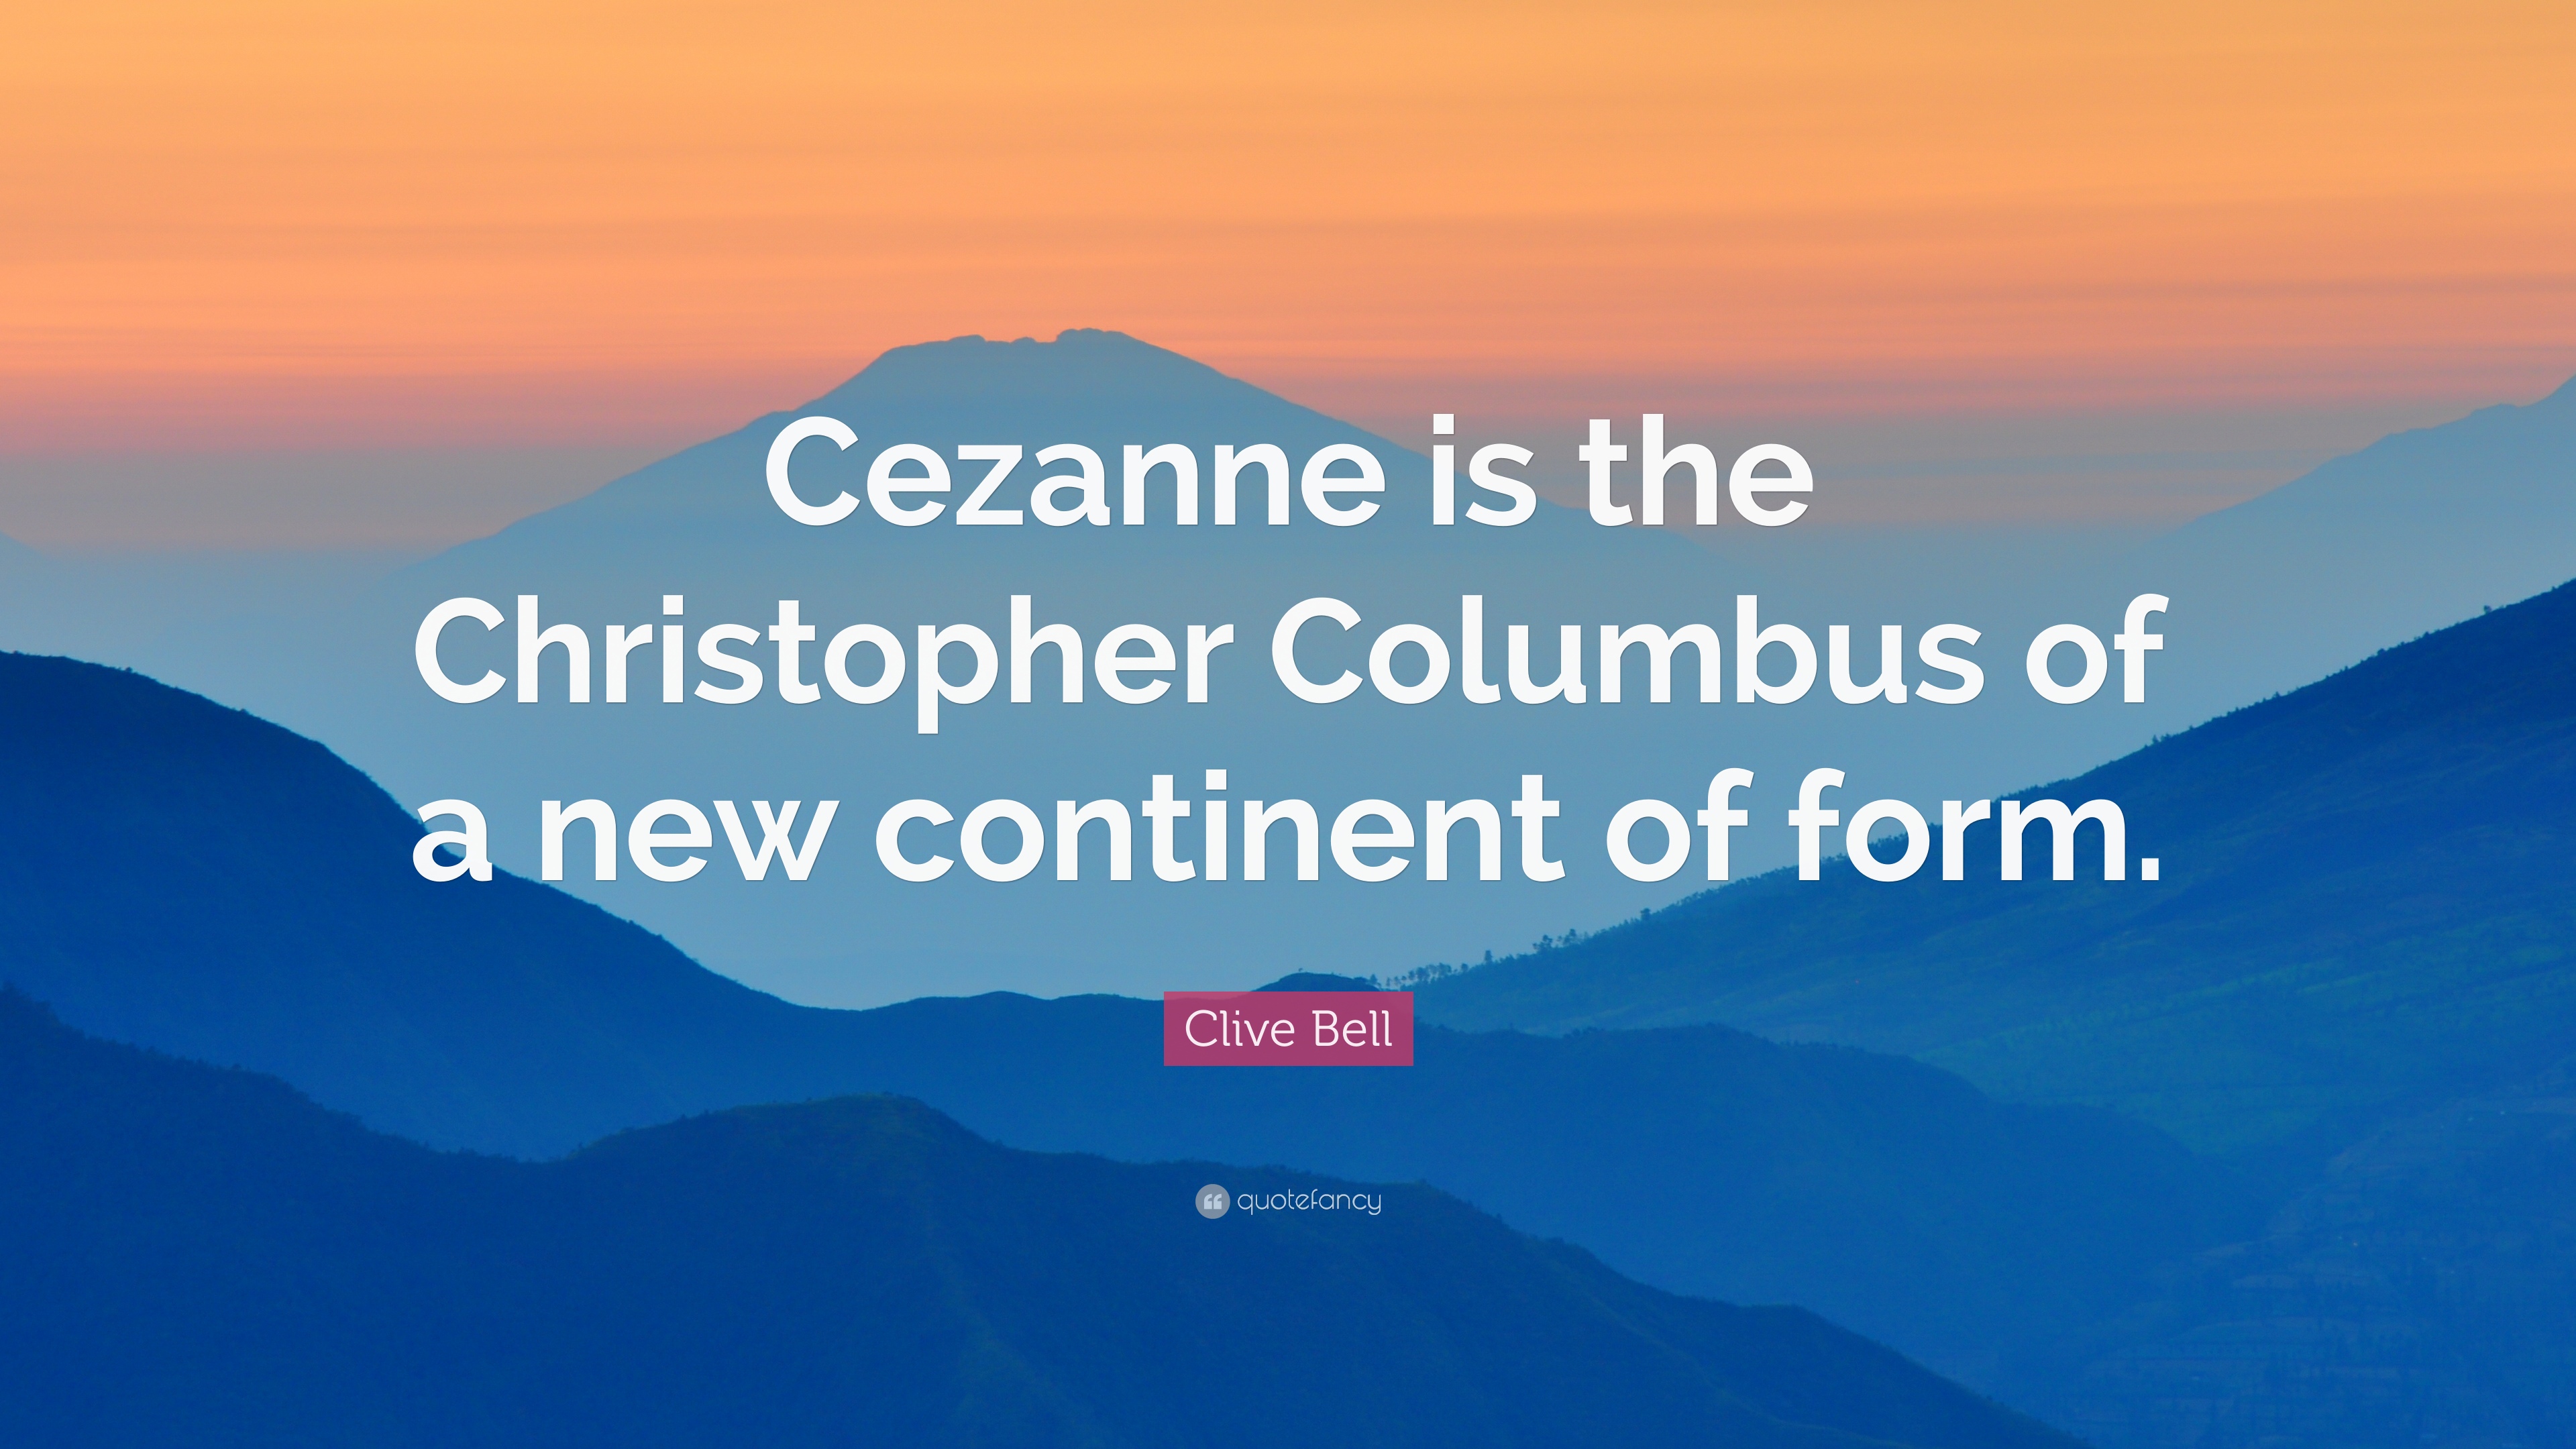 Clive Bell Quote: “Cezanne is the Christopher Columbus of a new